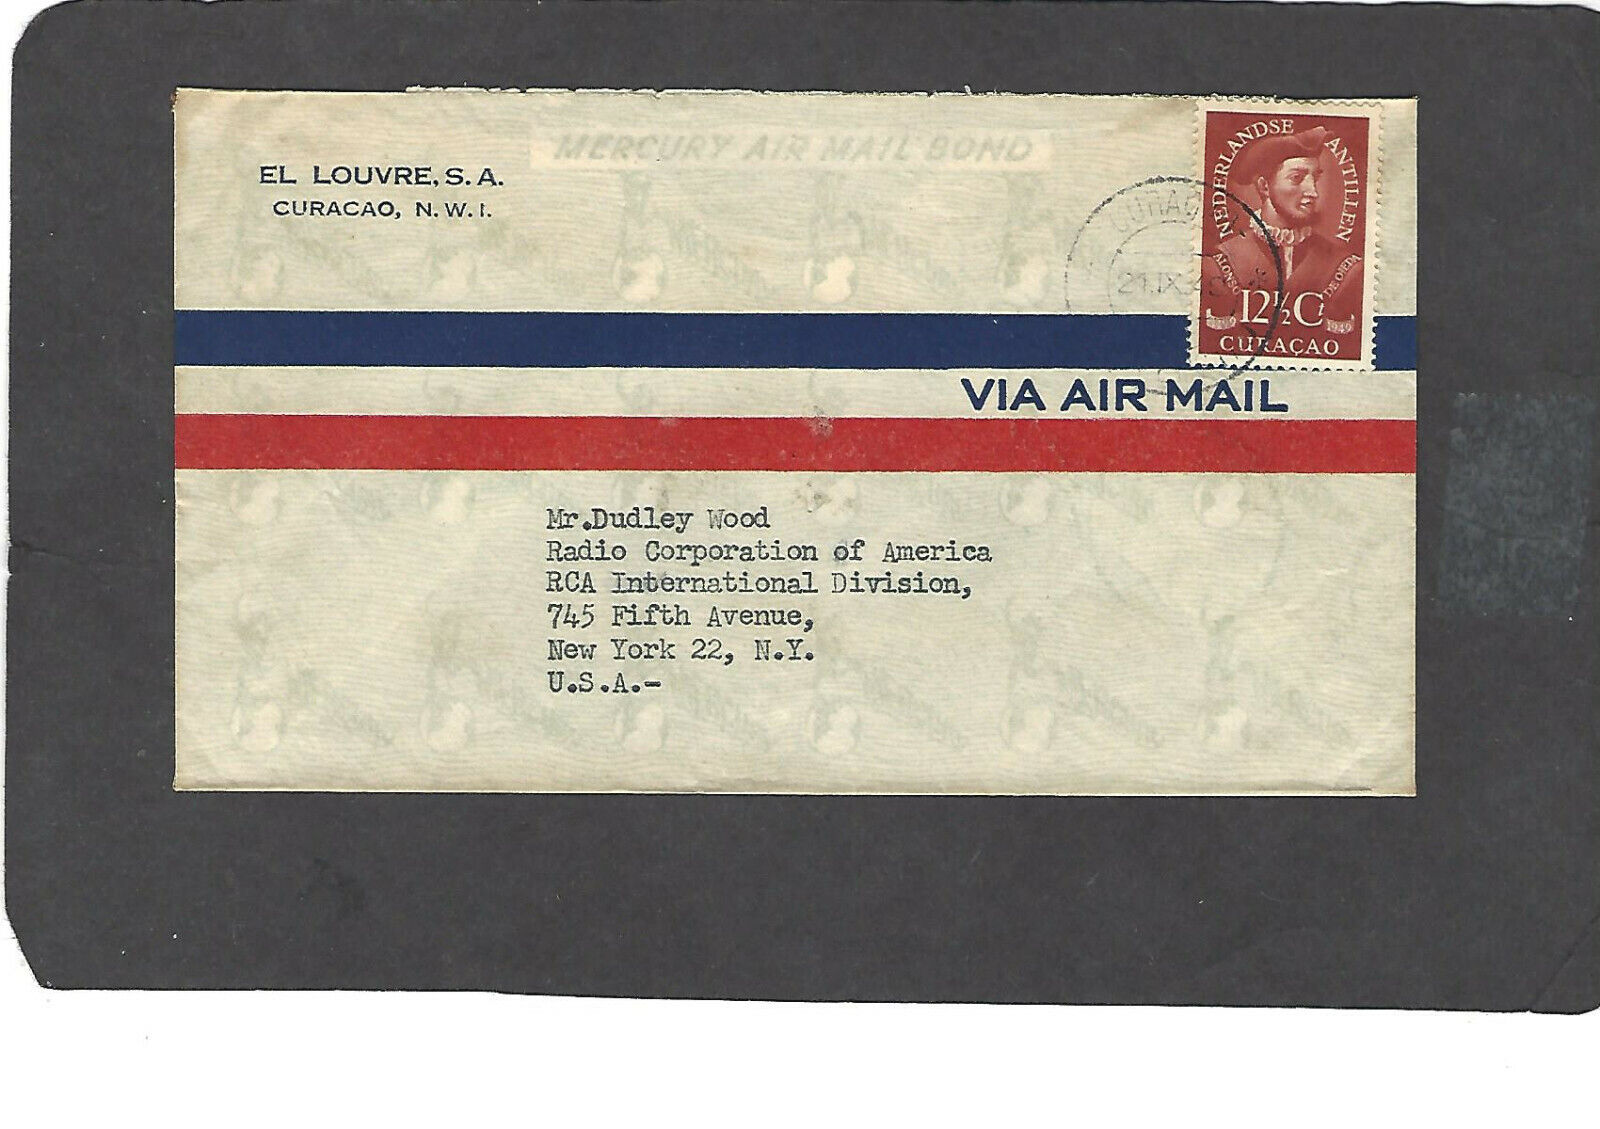 1949 El Louvre,sa Curacao,nwi To Rca,new York,ny Cover